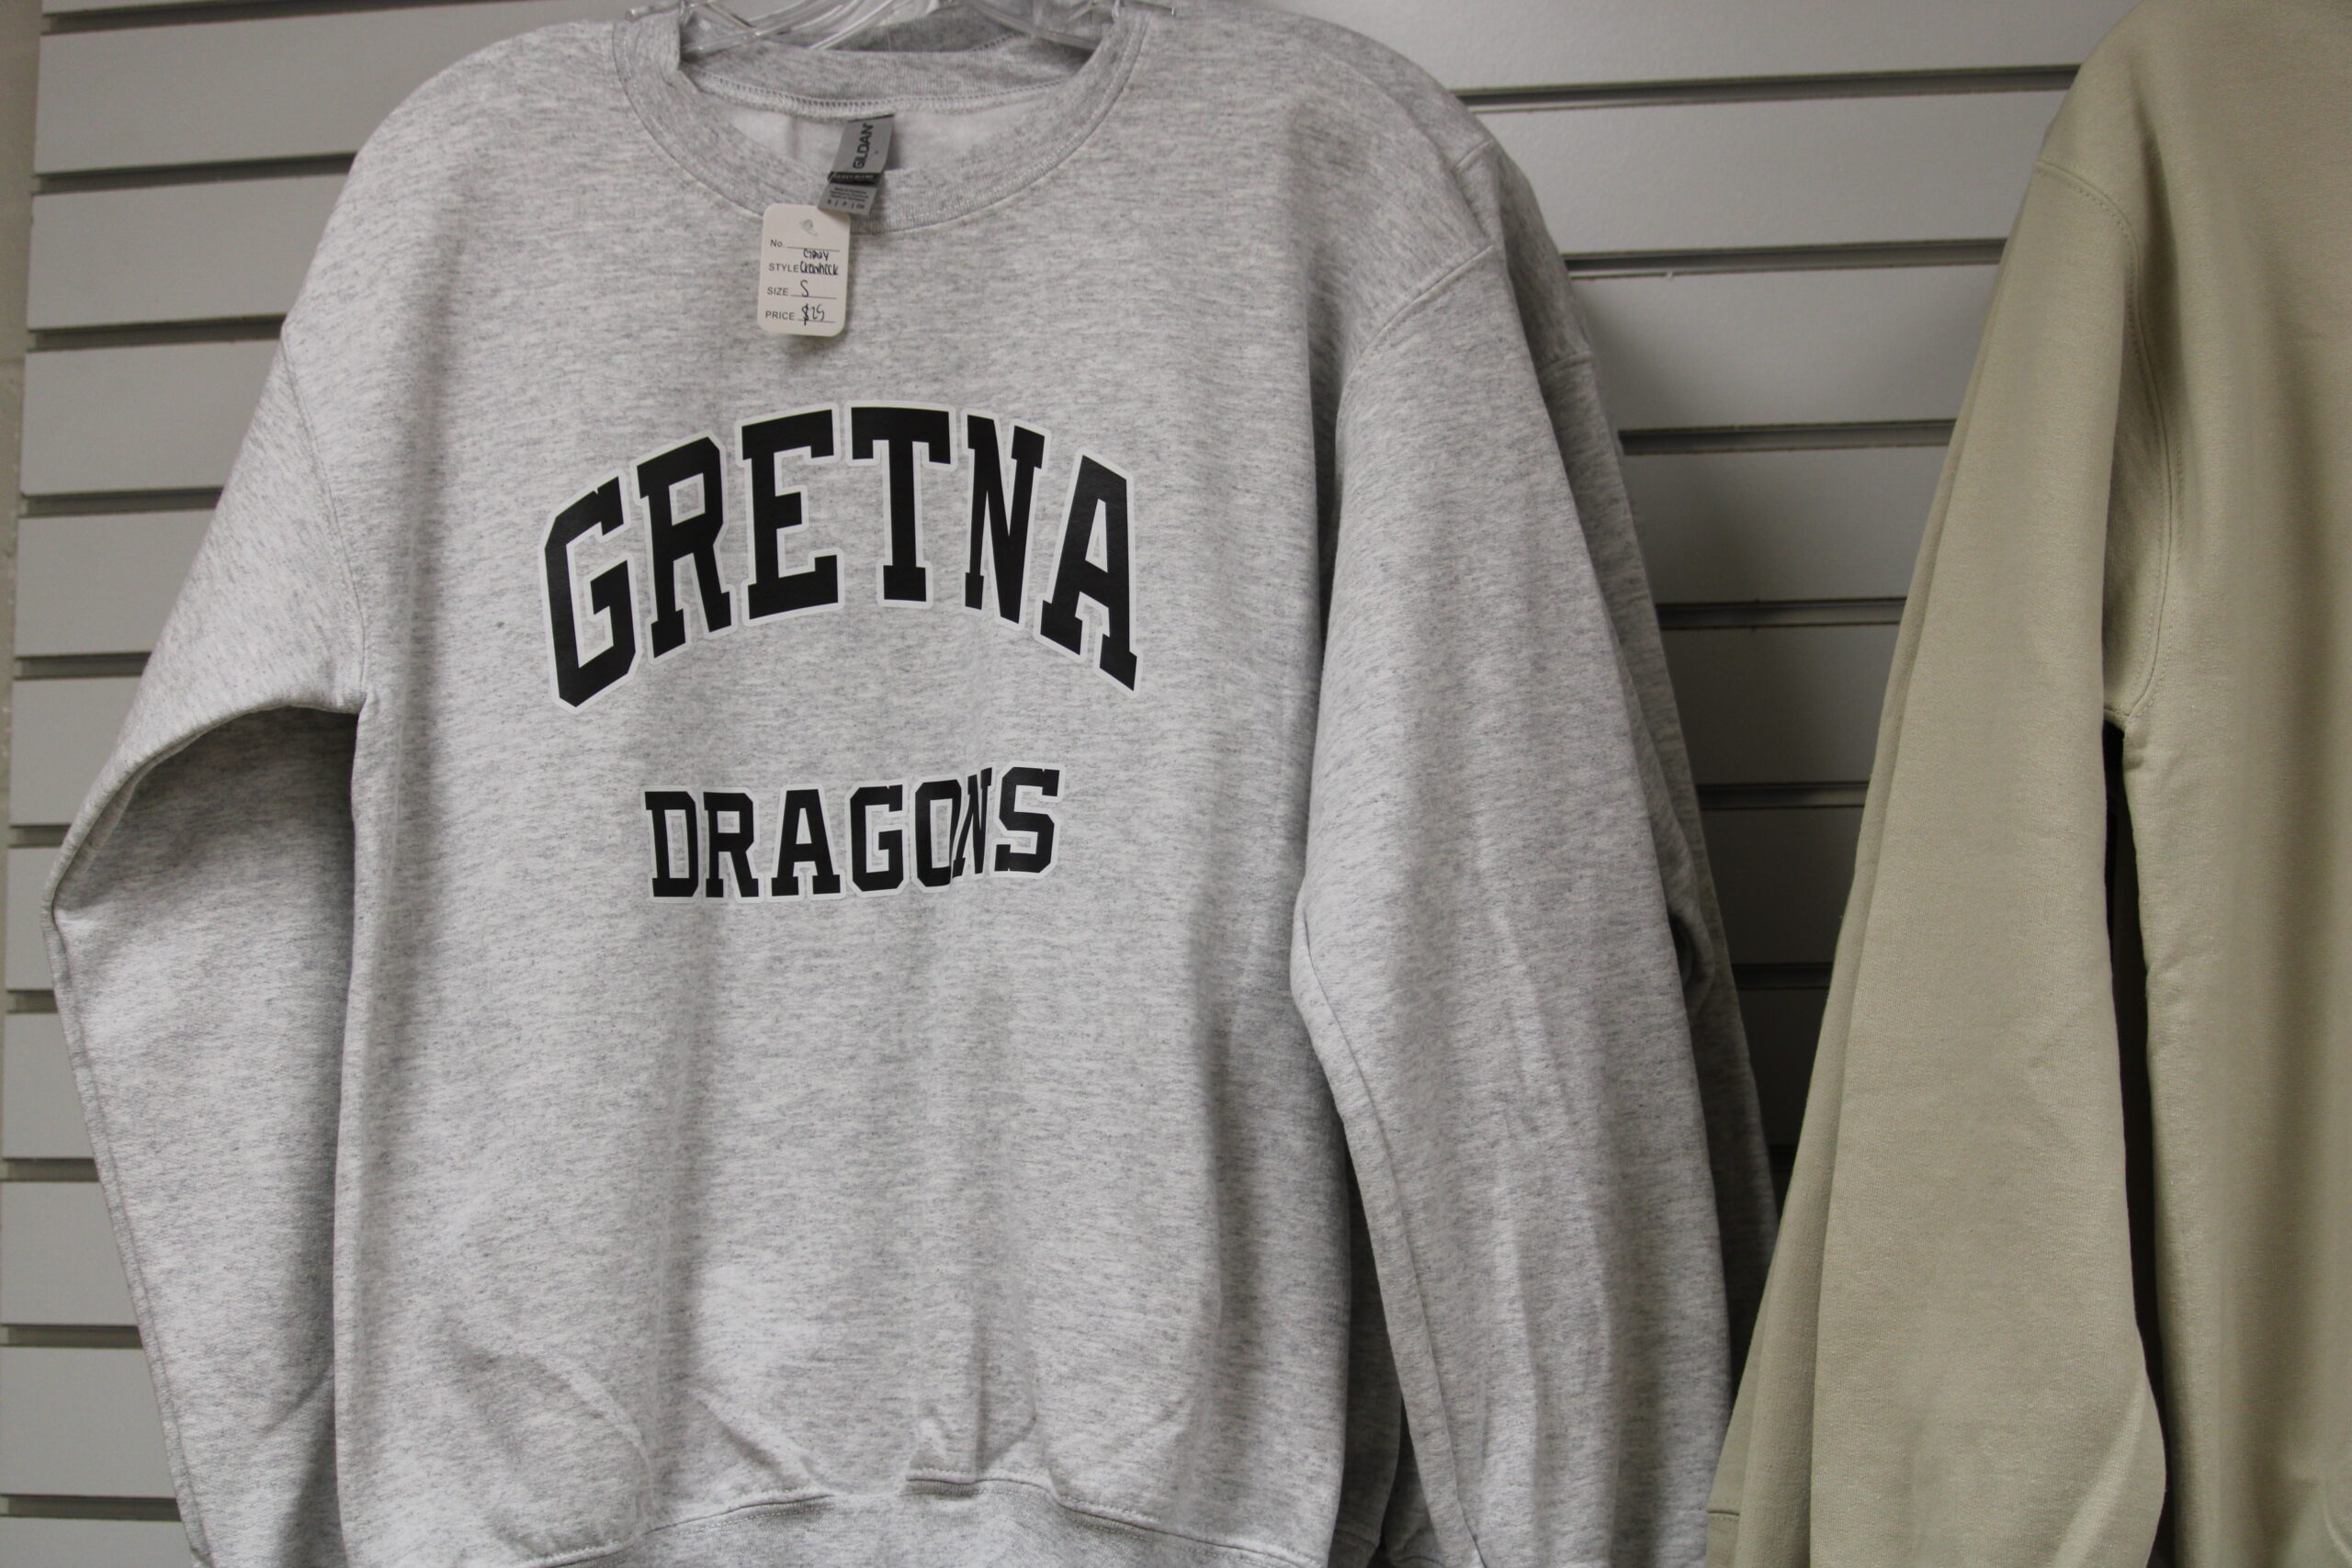 GHSs new school store, The Dragons Lair, opened its doors to students on Oct. 5, supplying the students with a variety of designs and styles.